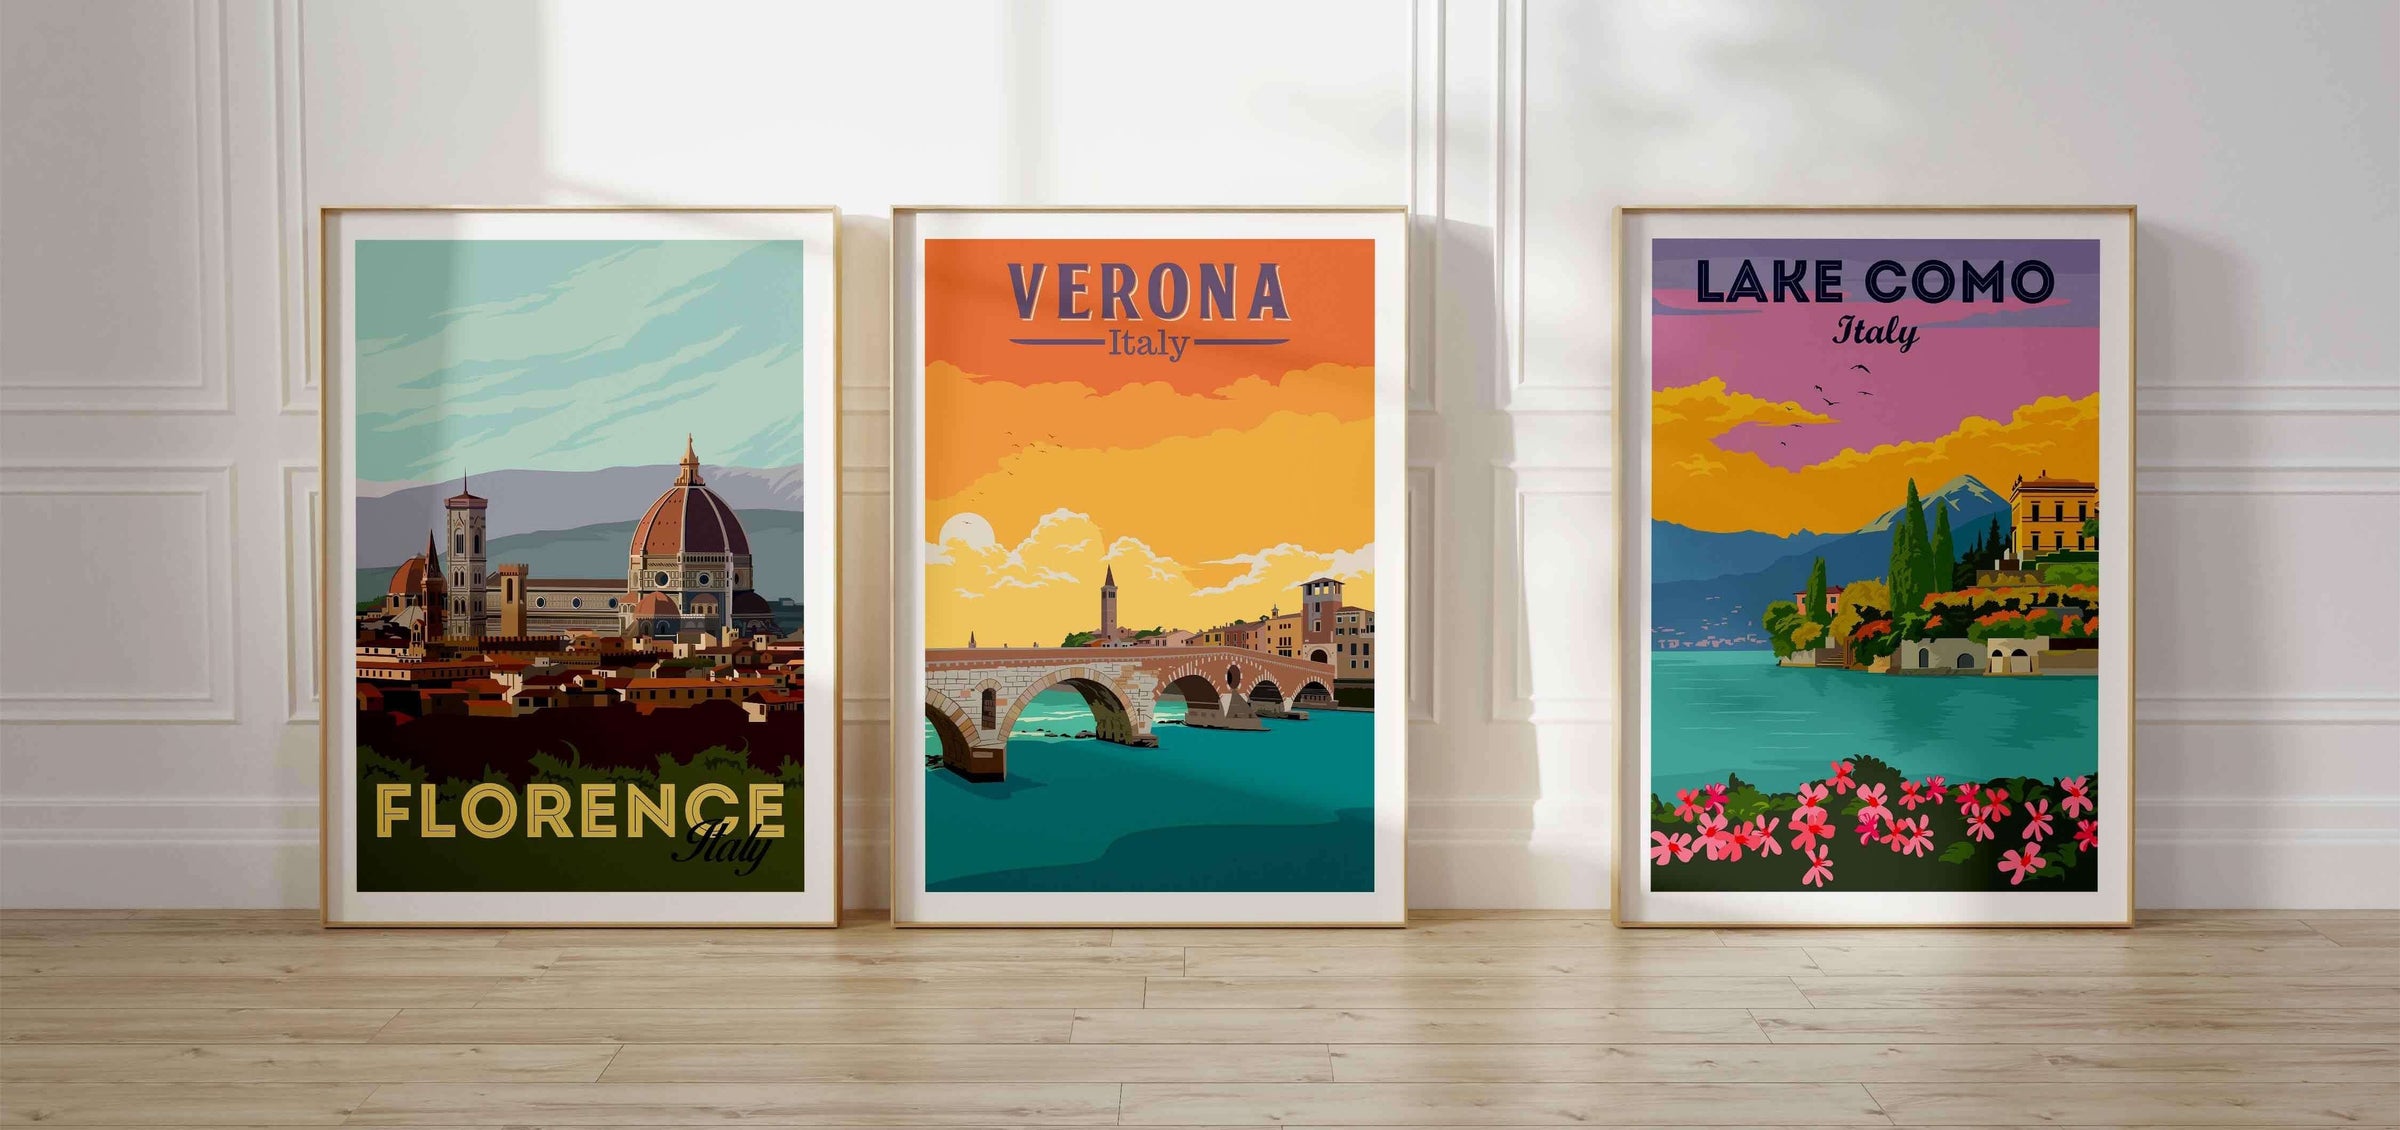 Vintage Style Travel Poster Prints - set of 3 framed travel prints on the floor featuring Florence, Verona and Lake Come